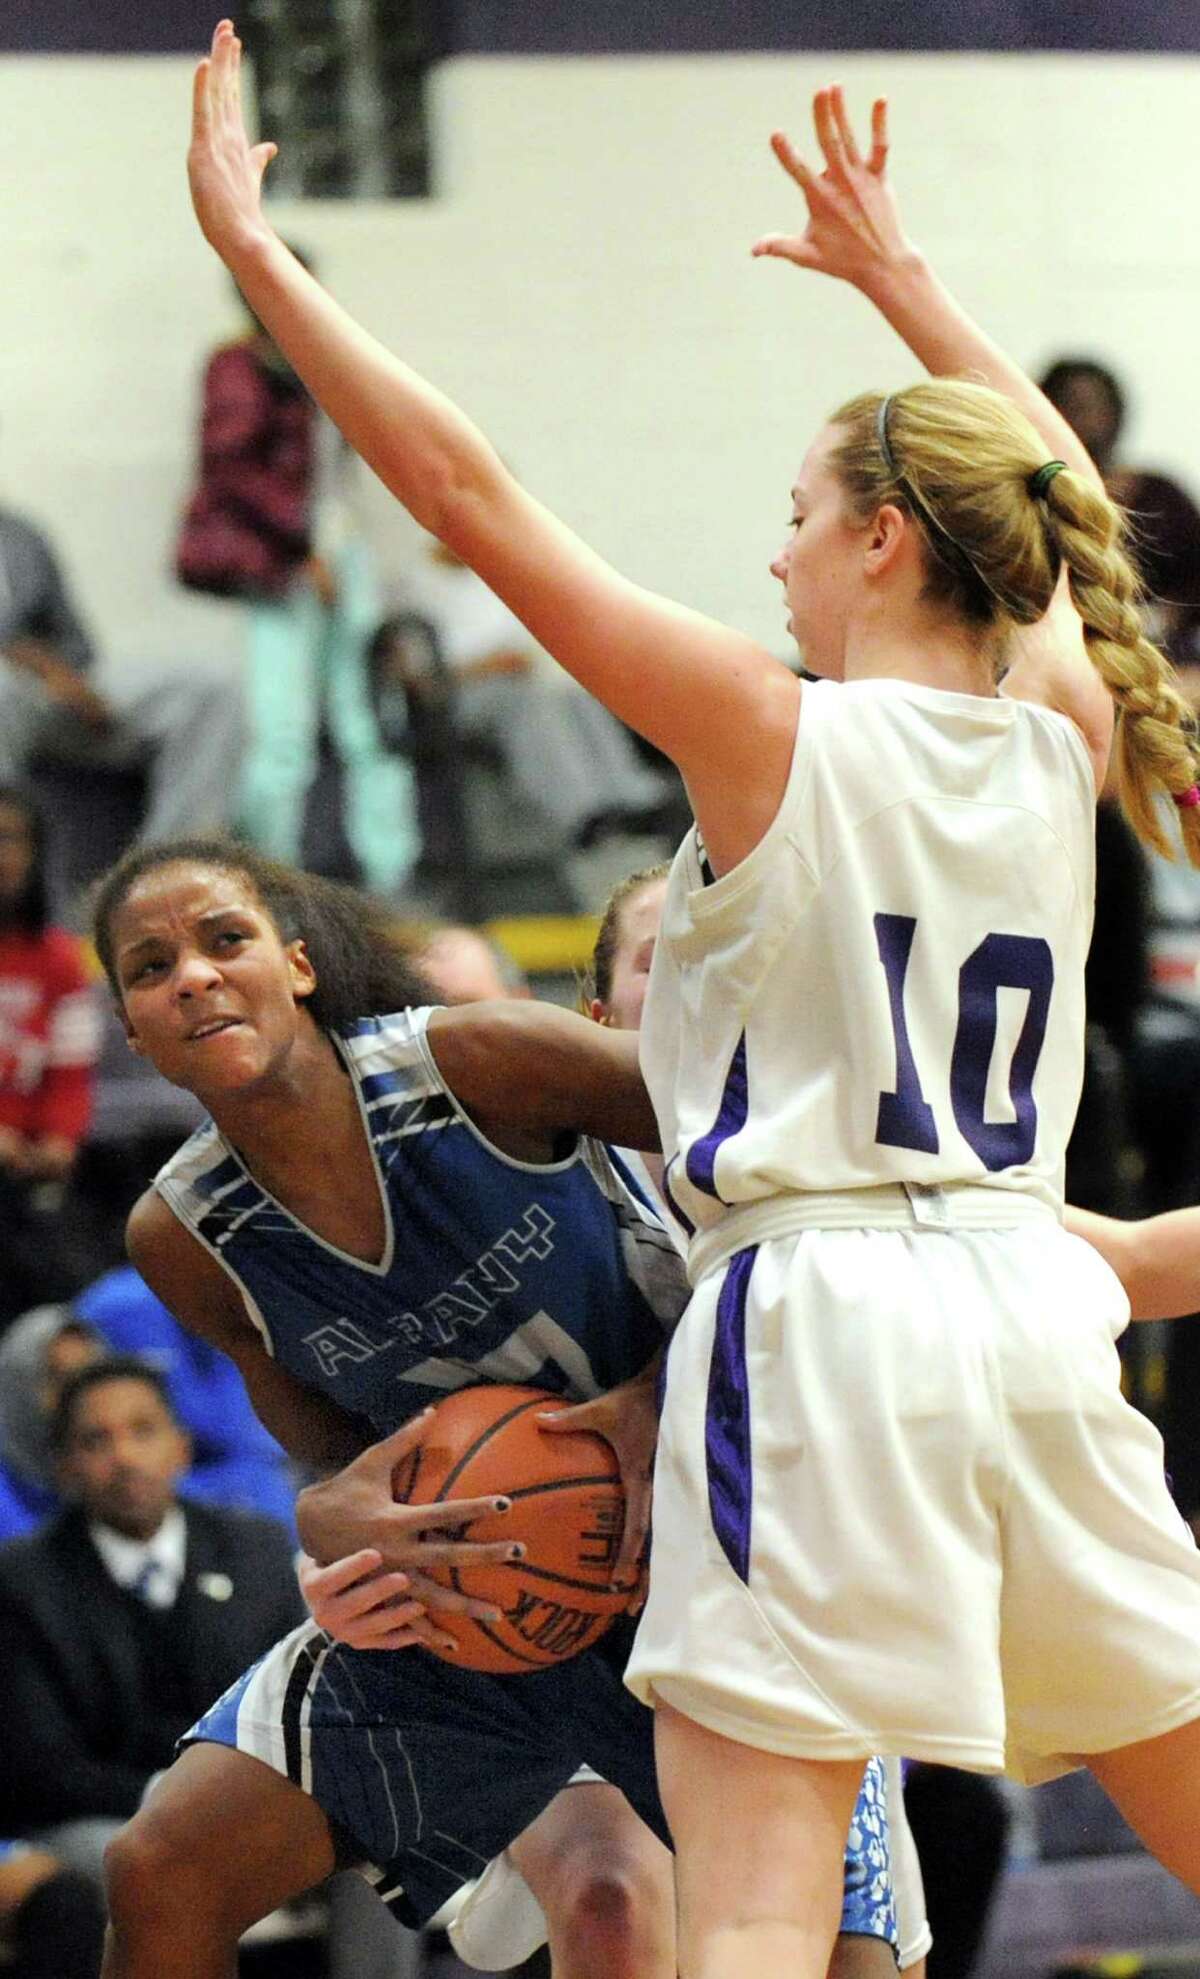 Albany's Mylah Chandler, left, works to get to the hoop as CCHS's Julia Engster defends during their basketball on Thursday, Jan. 15, 2015, at Catholic Central High School in Troy, N.Y. (Cindy Schultz / Times Union)